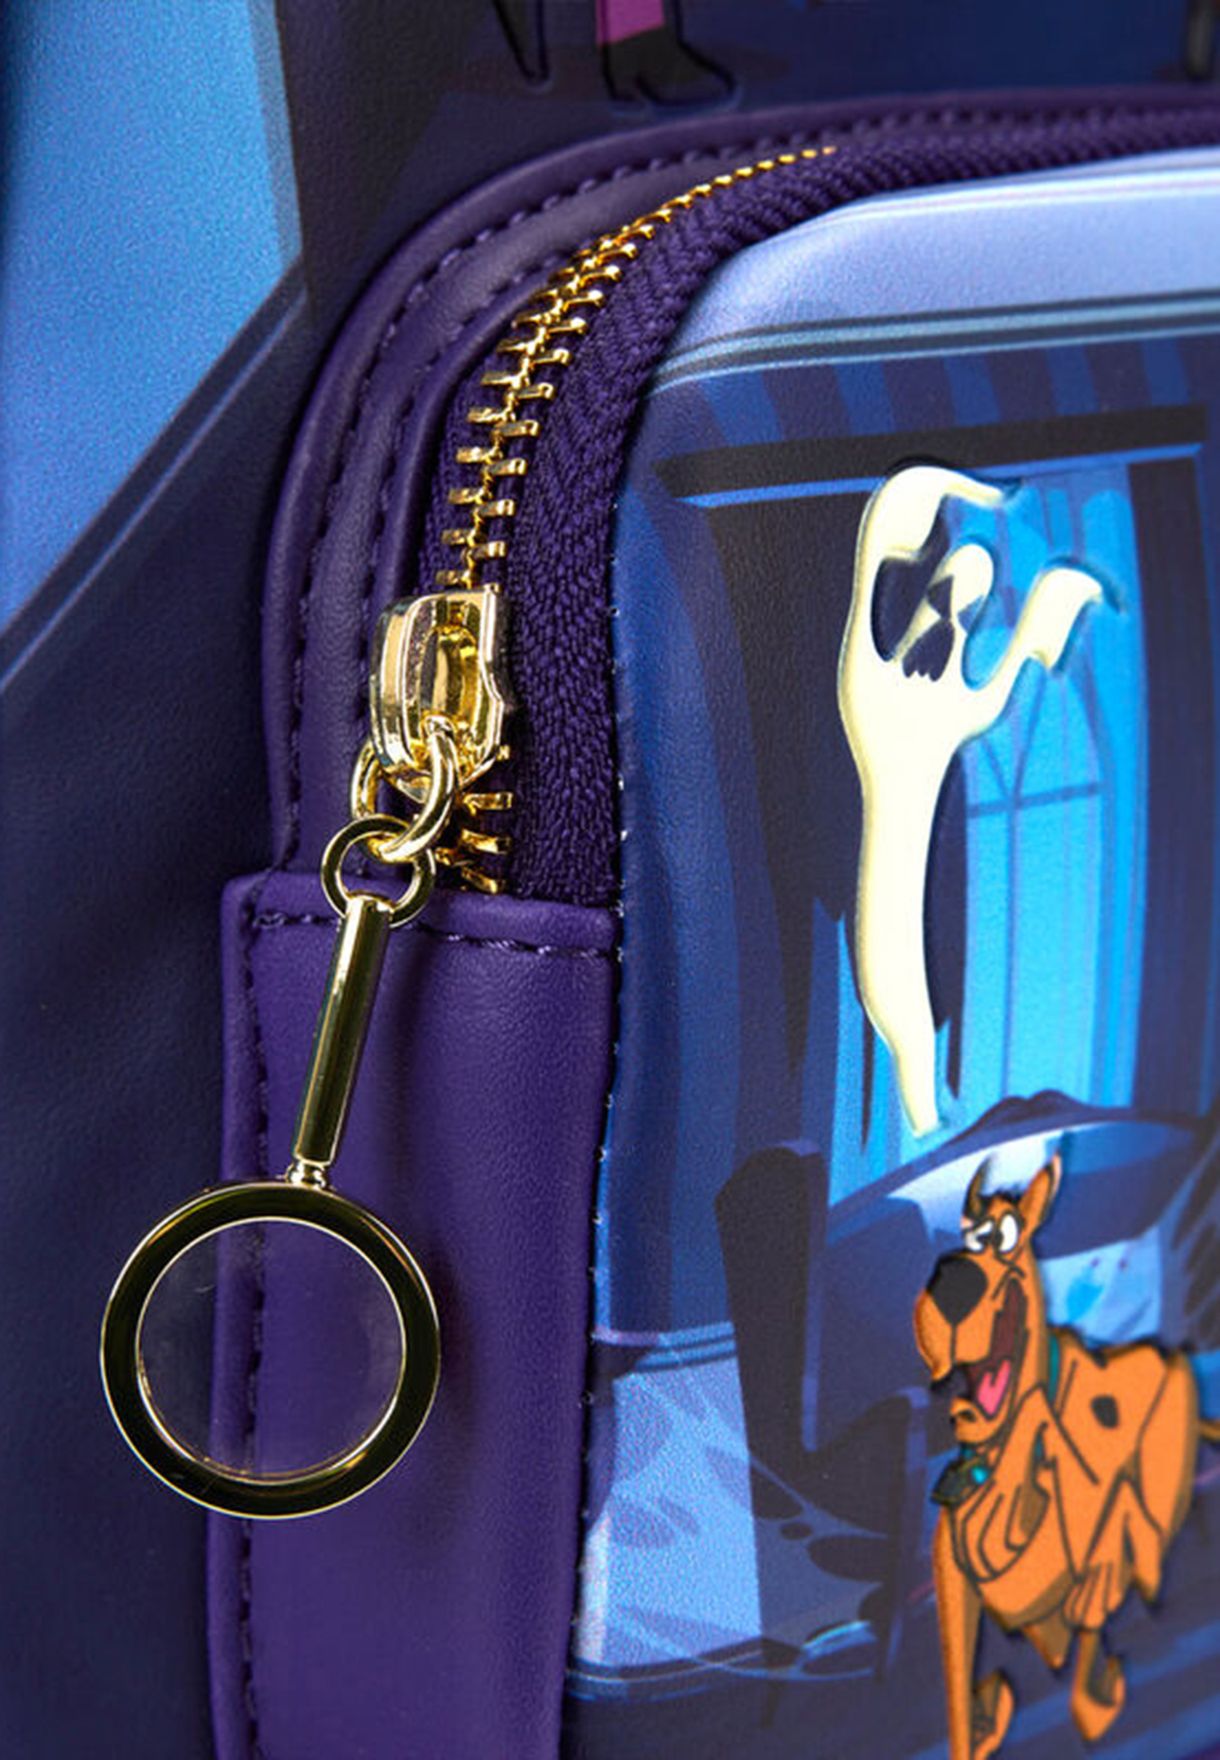 Kids Scooby Doo Monster Chase Backpack